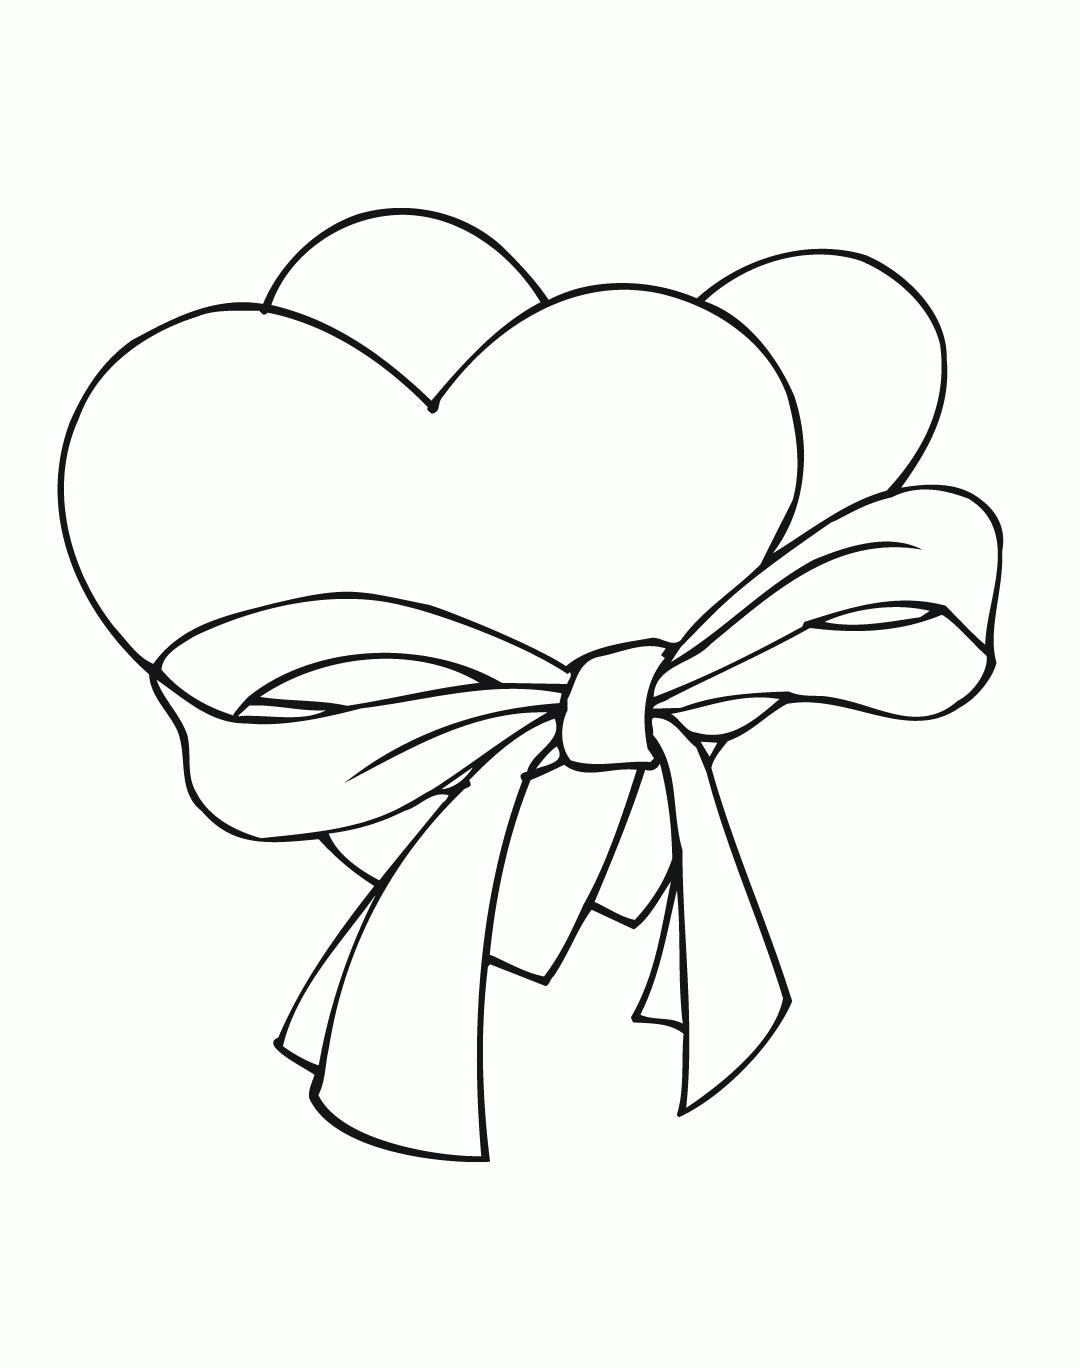 Hearts With Wings And Roses Coloring Pages Coloring Home